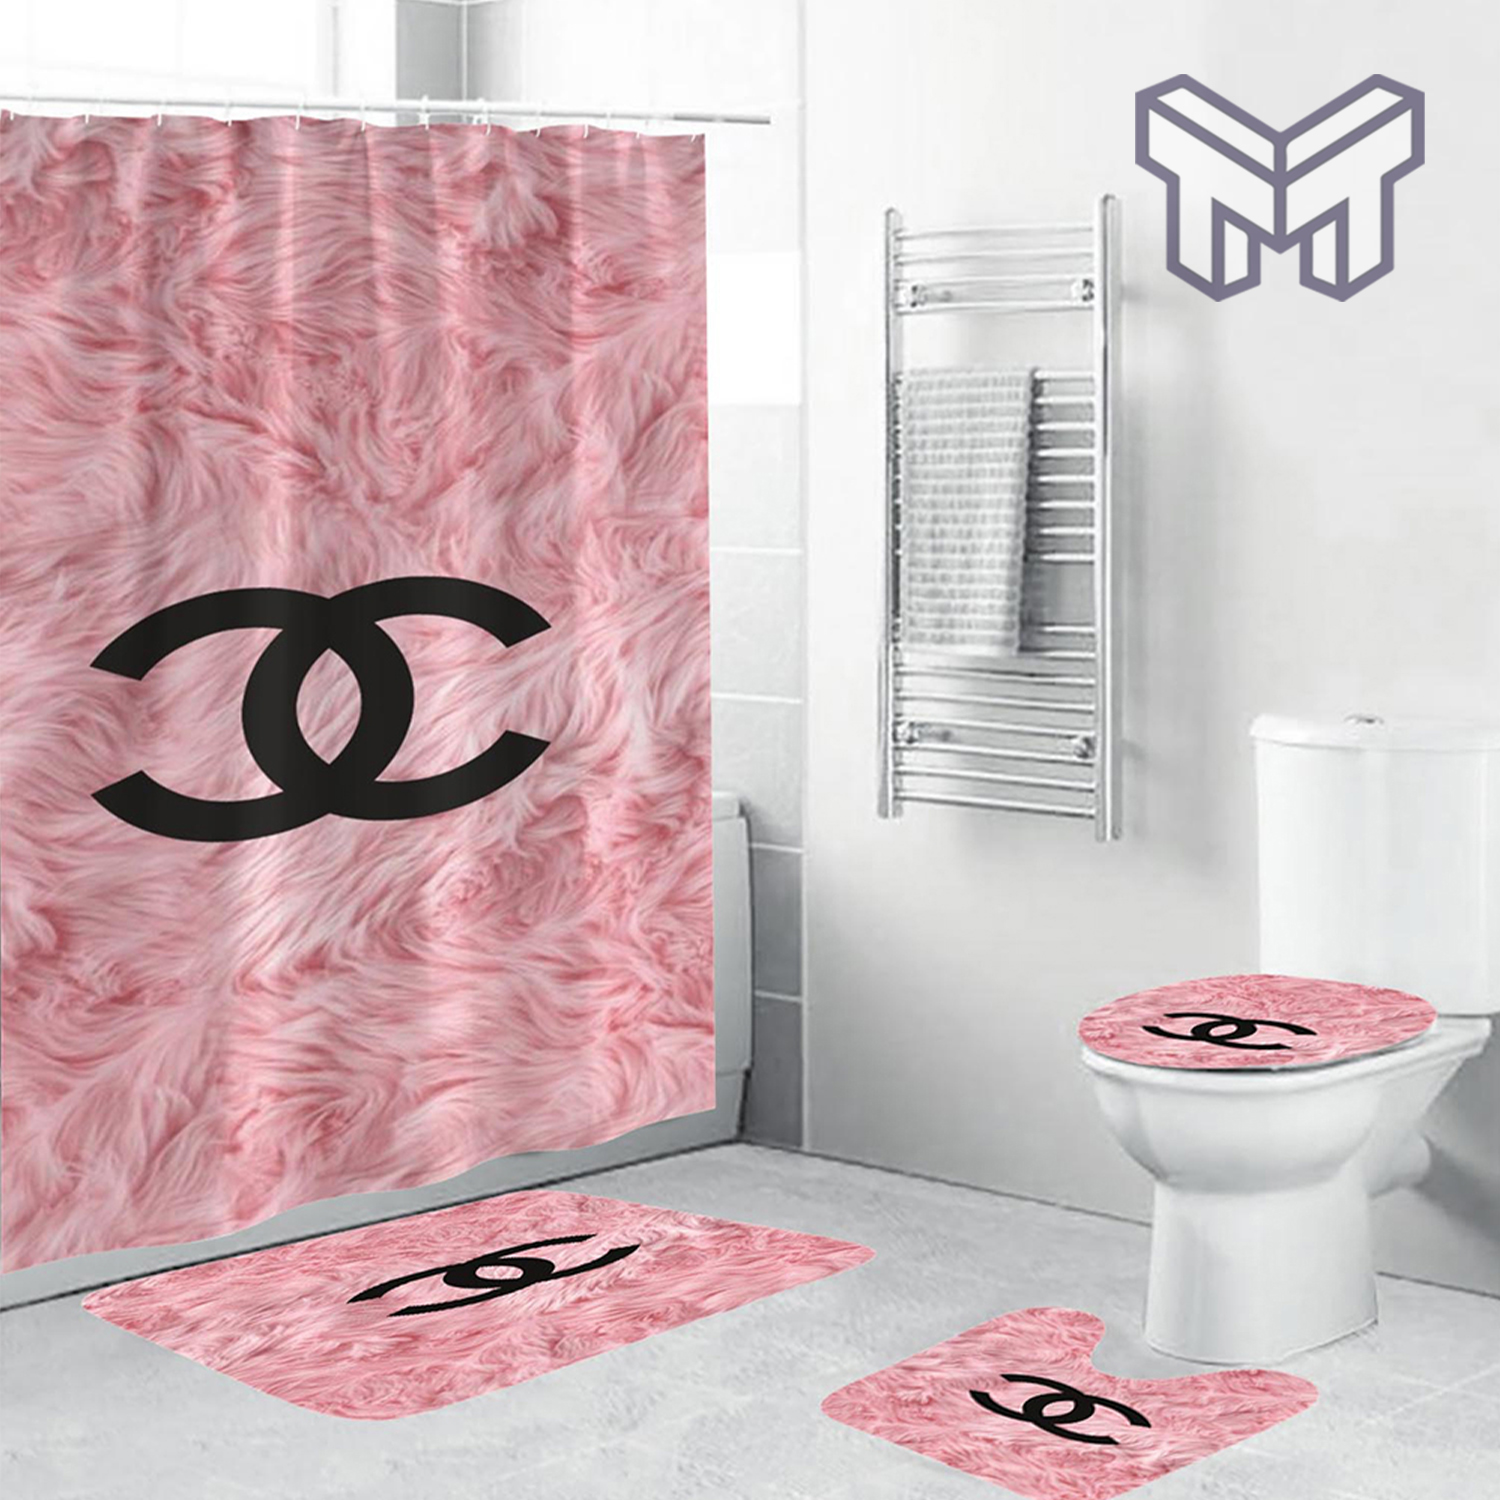 Coco Chanel Black Logo In Pink Feather Bathroom Set Shower Curtain Shower  Curtain And Rug Toilet Seat Lid Covers Bathroom Set - Muranotex Store